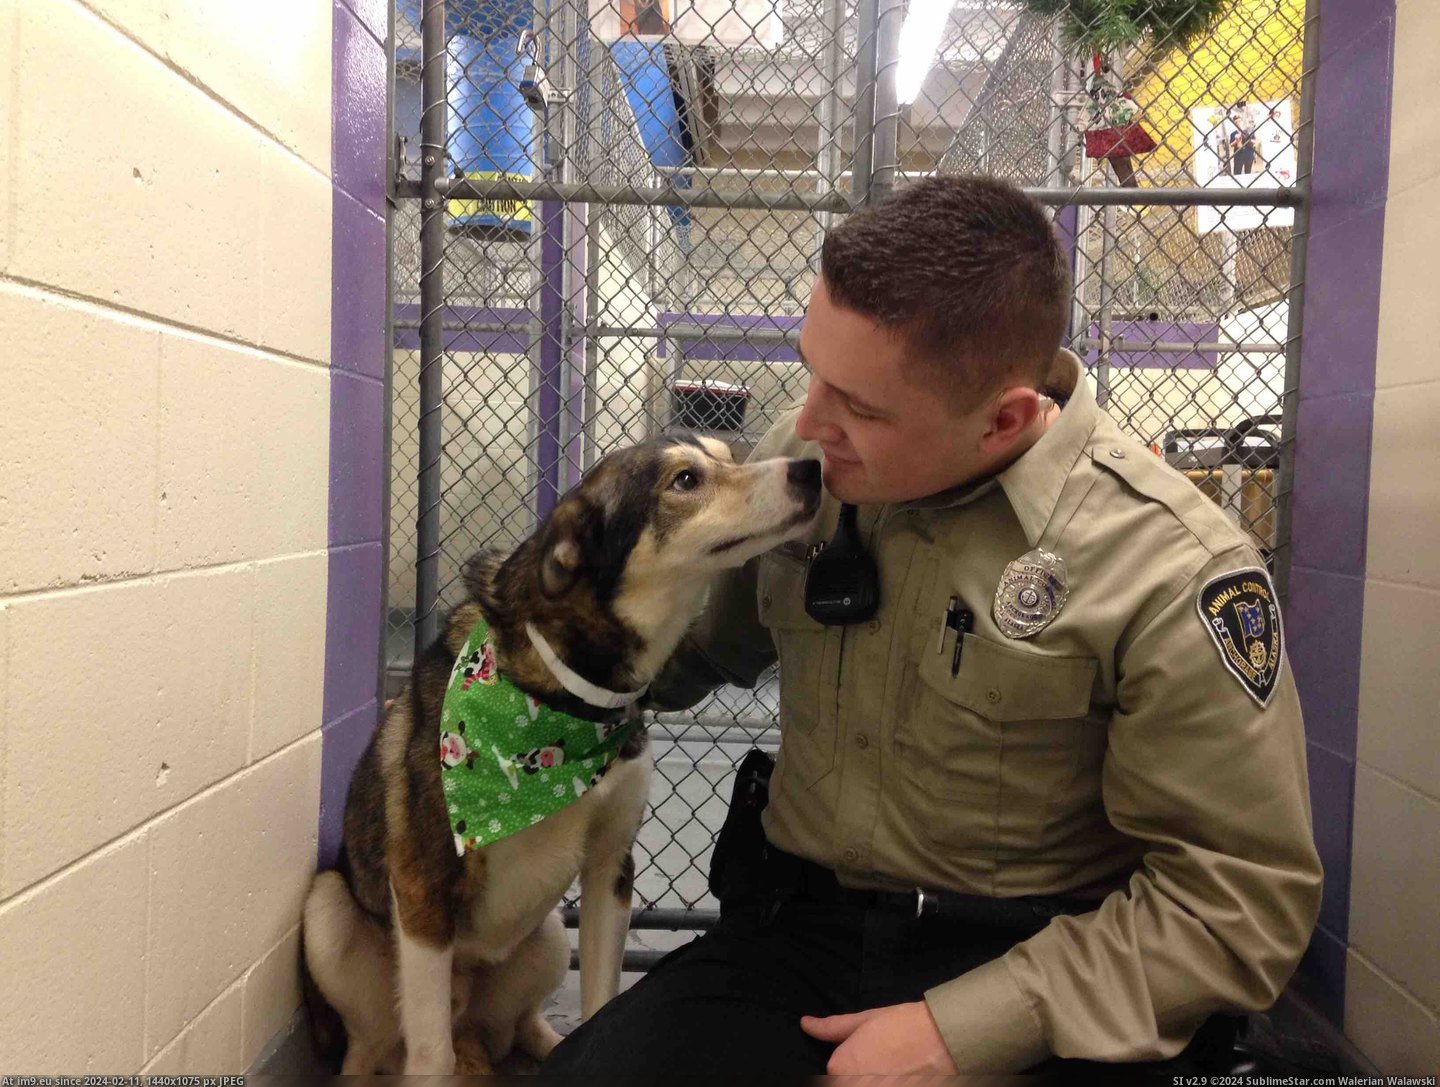 [Aww] This dog says goodbye to the Animal Control Officer that saved him before he went to his new home (in My r/AWW favs)